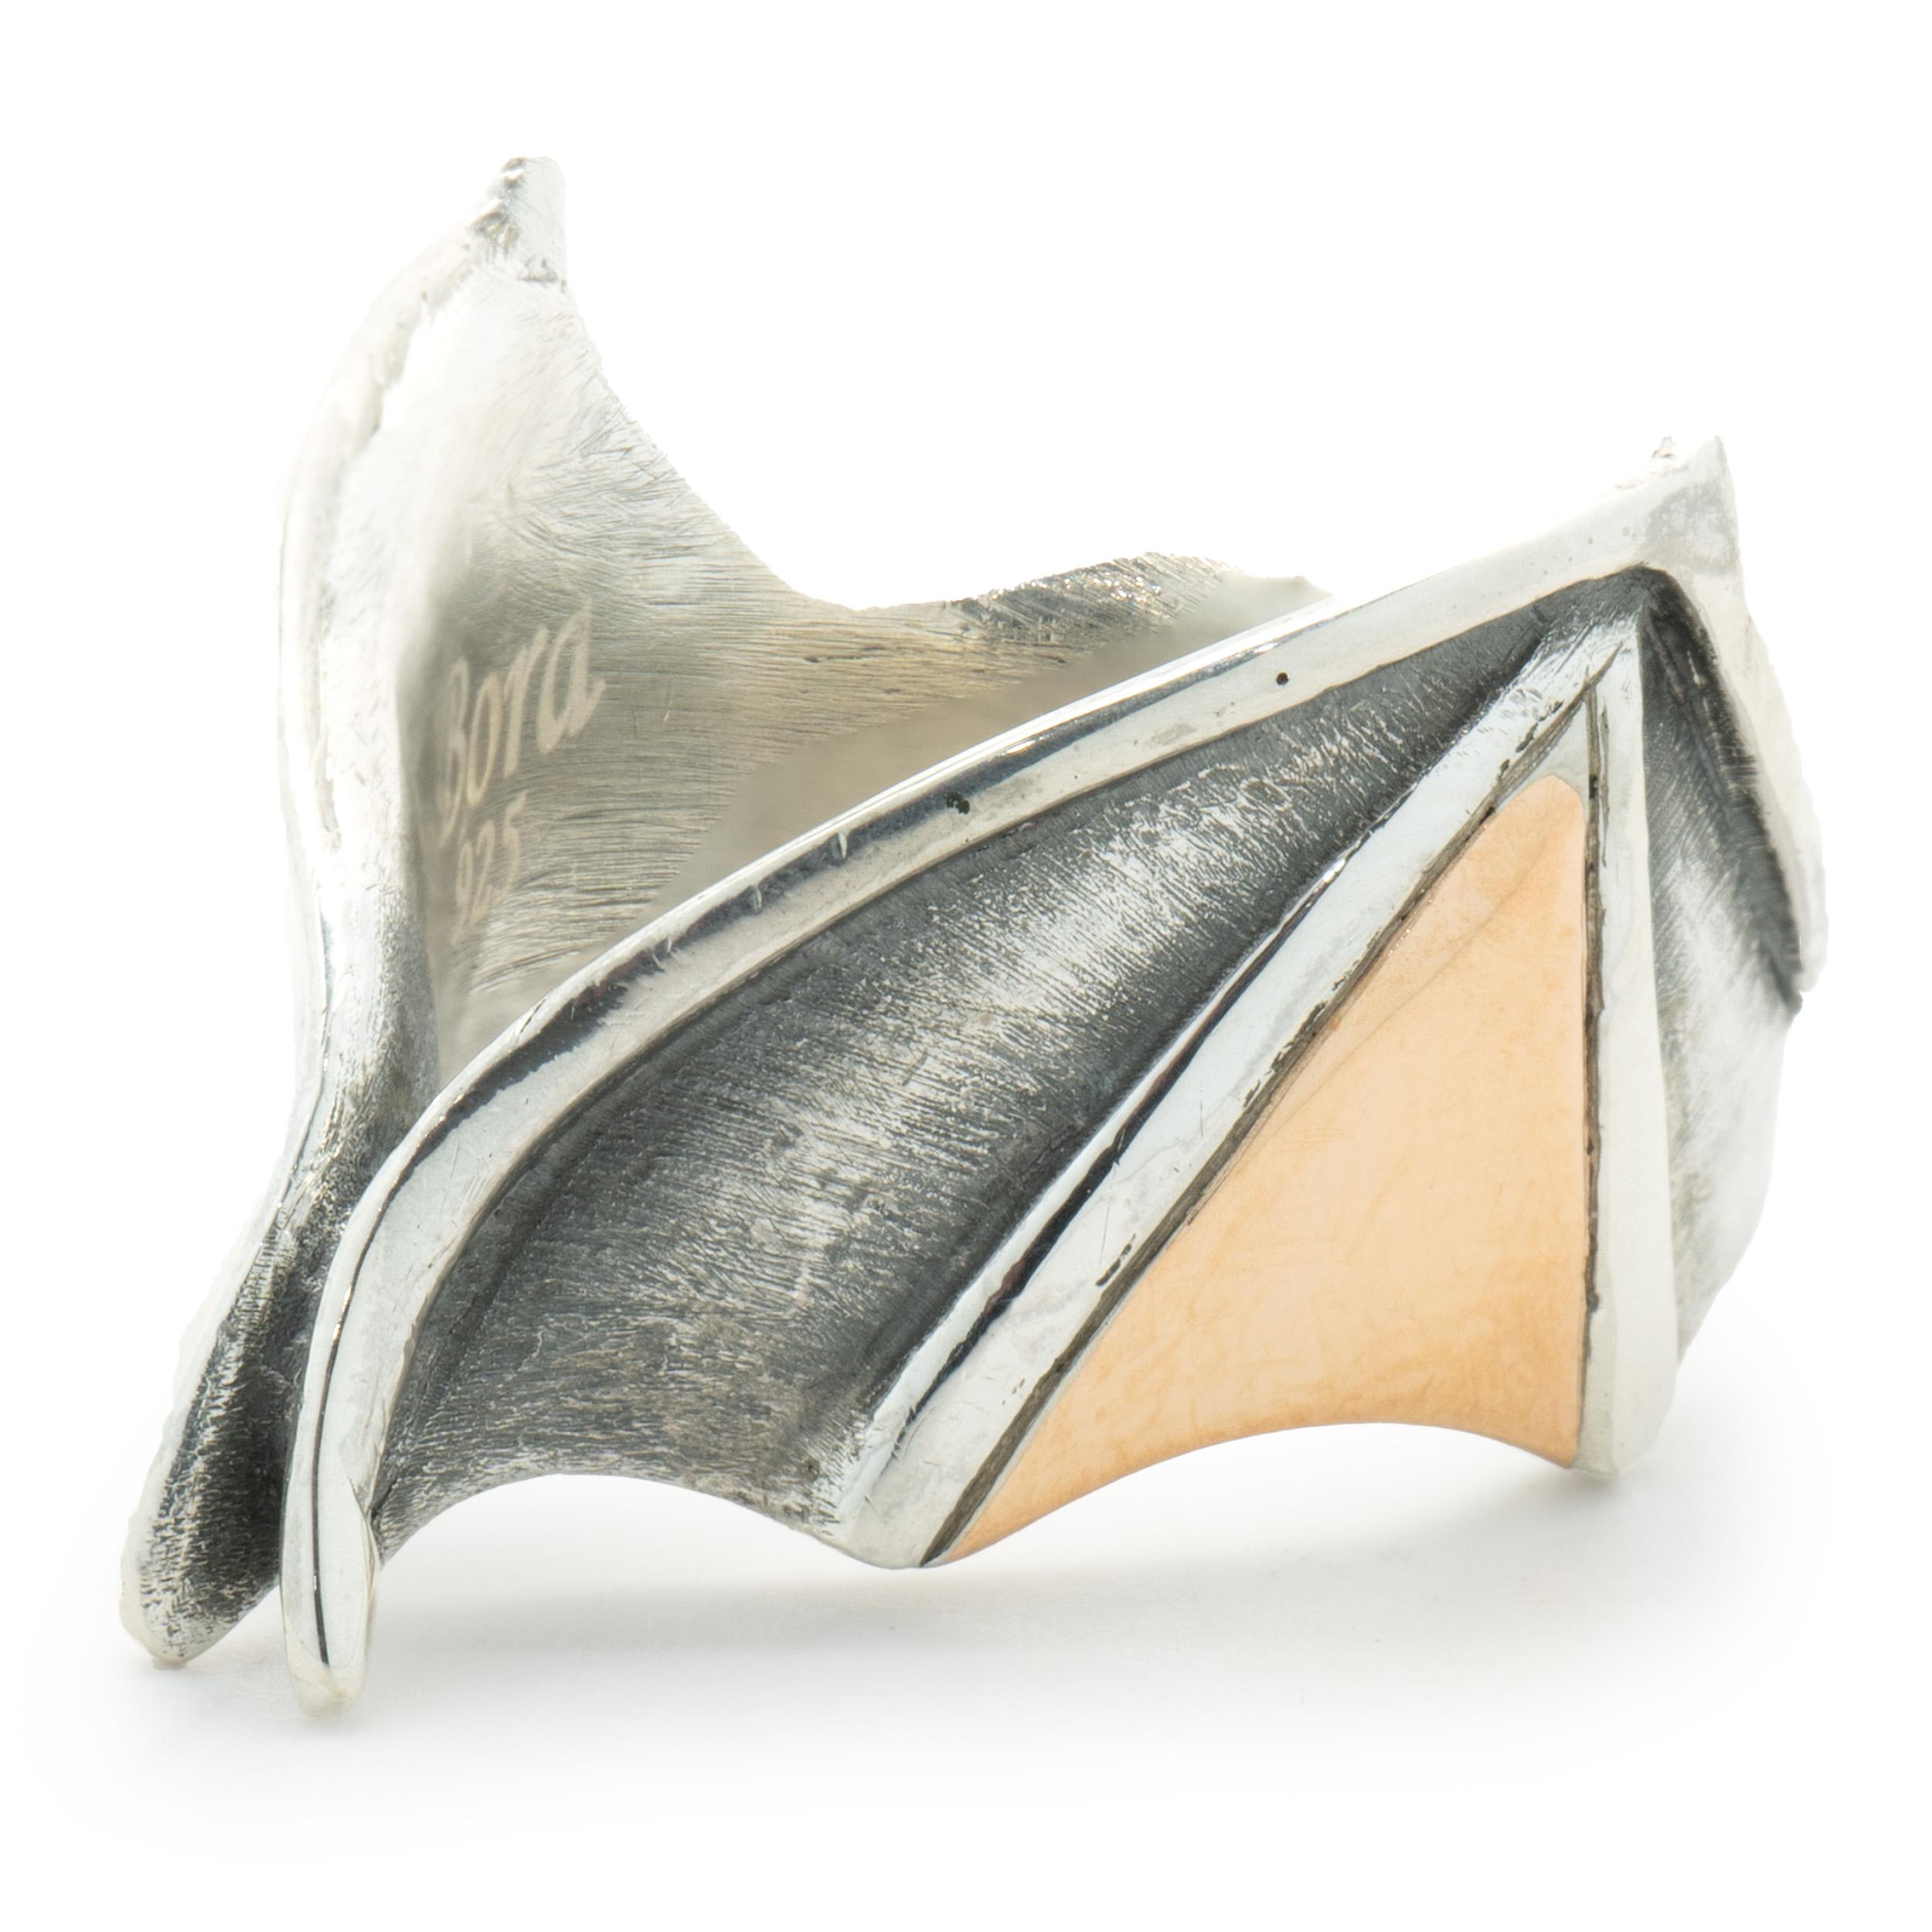 Designer: Bora
Material: sterling silver 
Dimensions: ring top measures 15mm wide
Size: 7.5
Weight: 9.90 grams